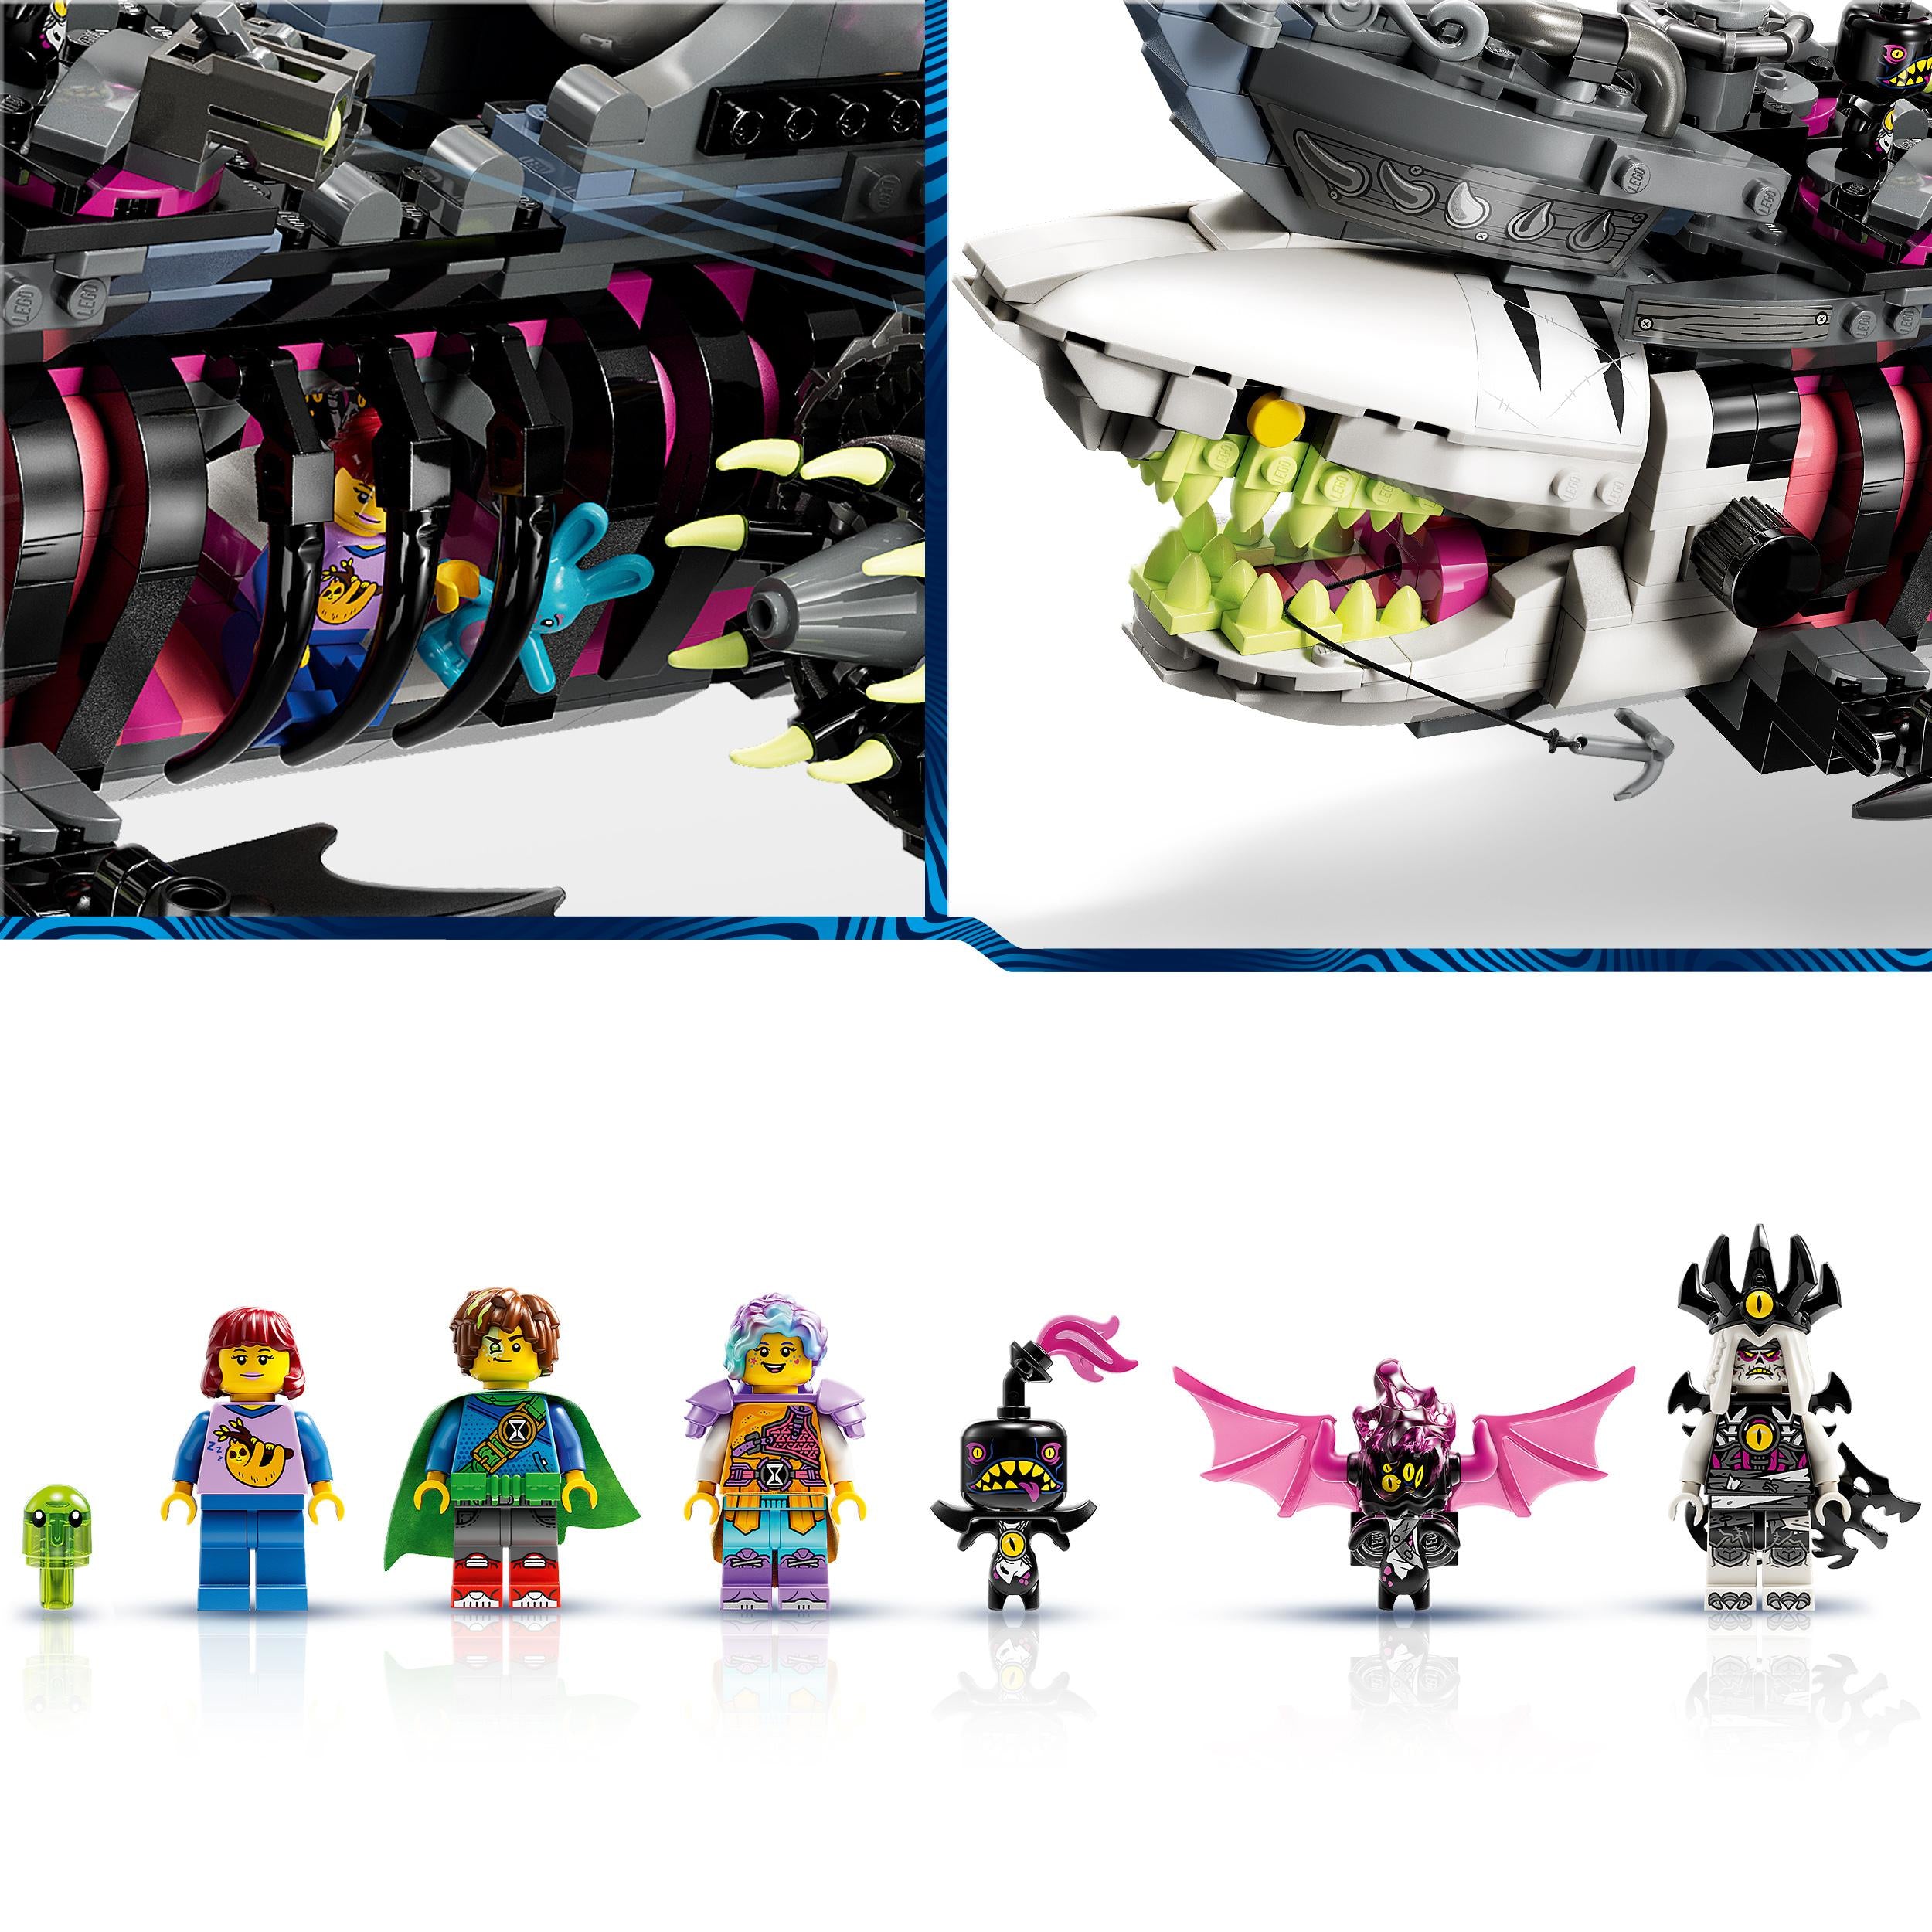 LEGO 71469 DREAMZzz Nightmare Shark Ship Set, Build a Pirate Ship Toy in 2 Ways, Dream Boat Model Building Kit with Mateo, Izzie, Nova & Nightmare King Minifigures, Toys for Kids, Girls, Boys